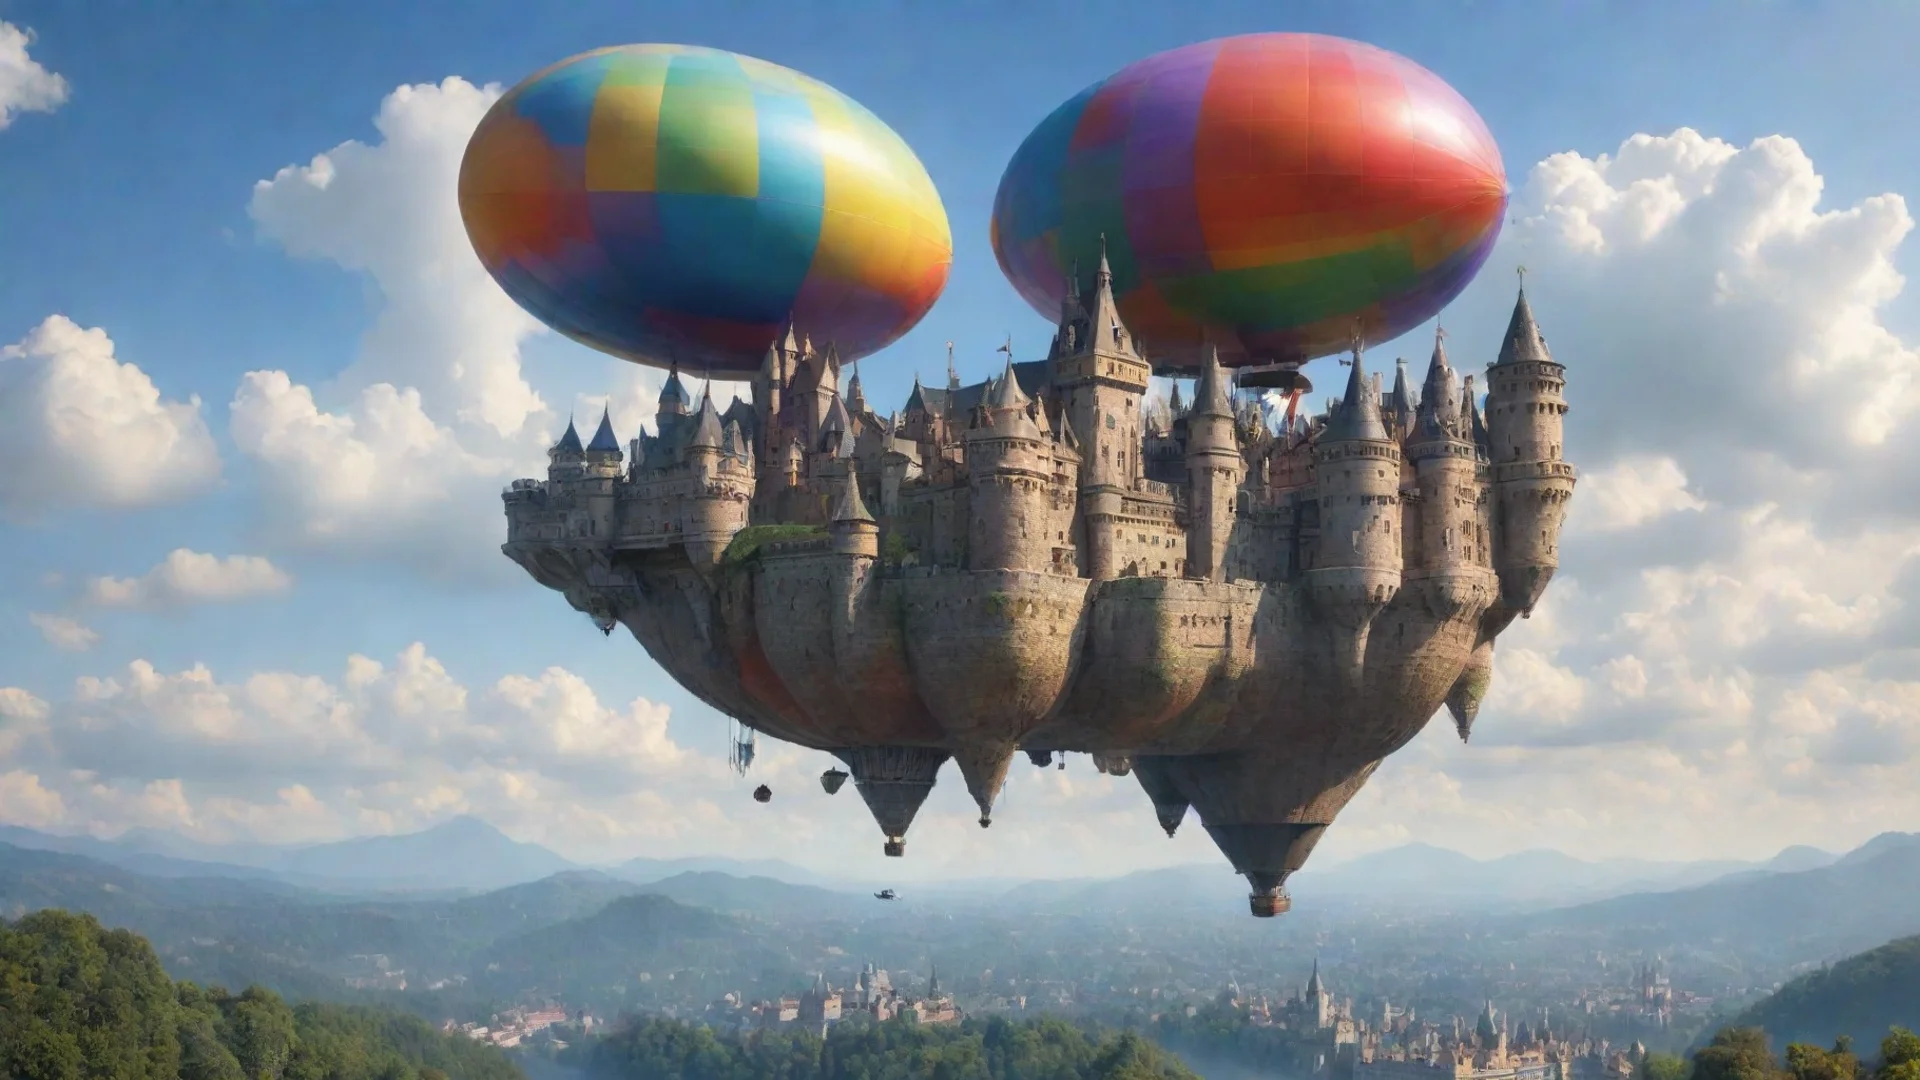 aicastle in sky amazing awesome architectural masterpiece wow hd colorful world floating blimp wide